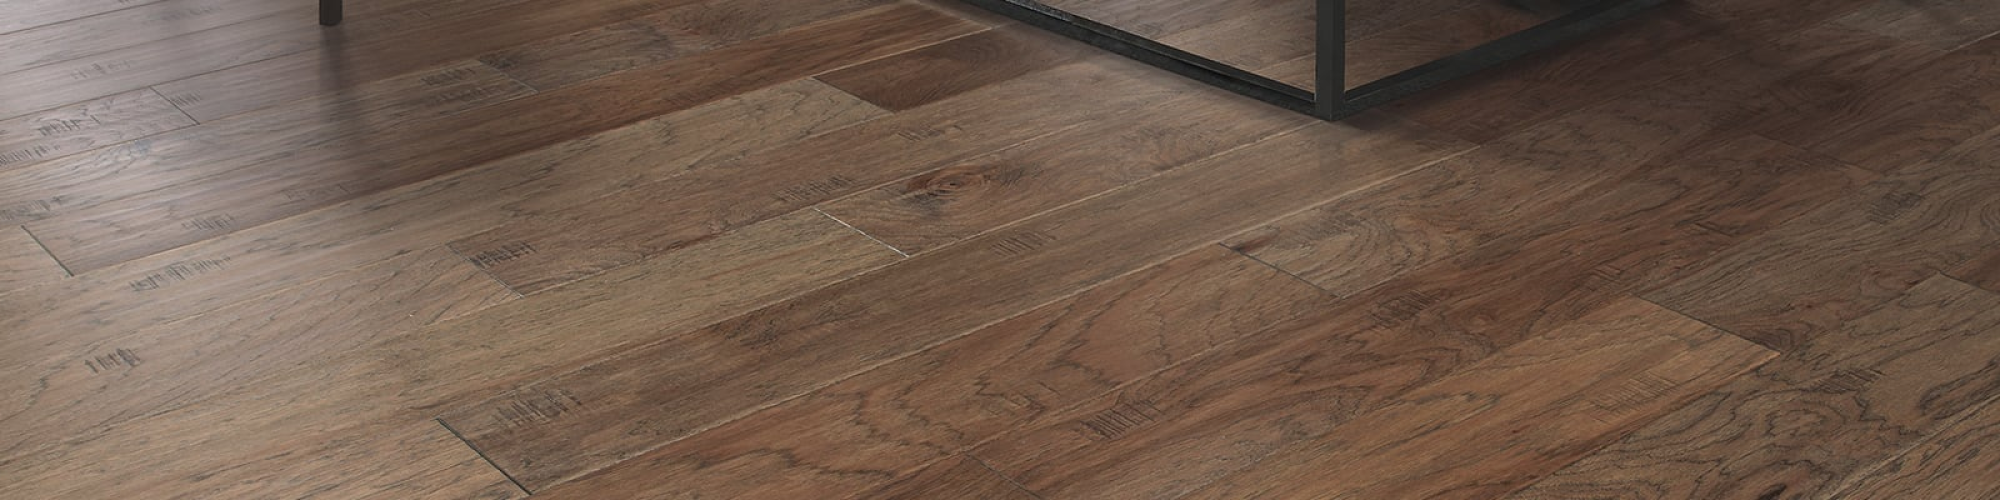 Hardwood info provided by Heritage Floor Coverings in the North Royalton, OH area